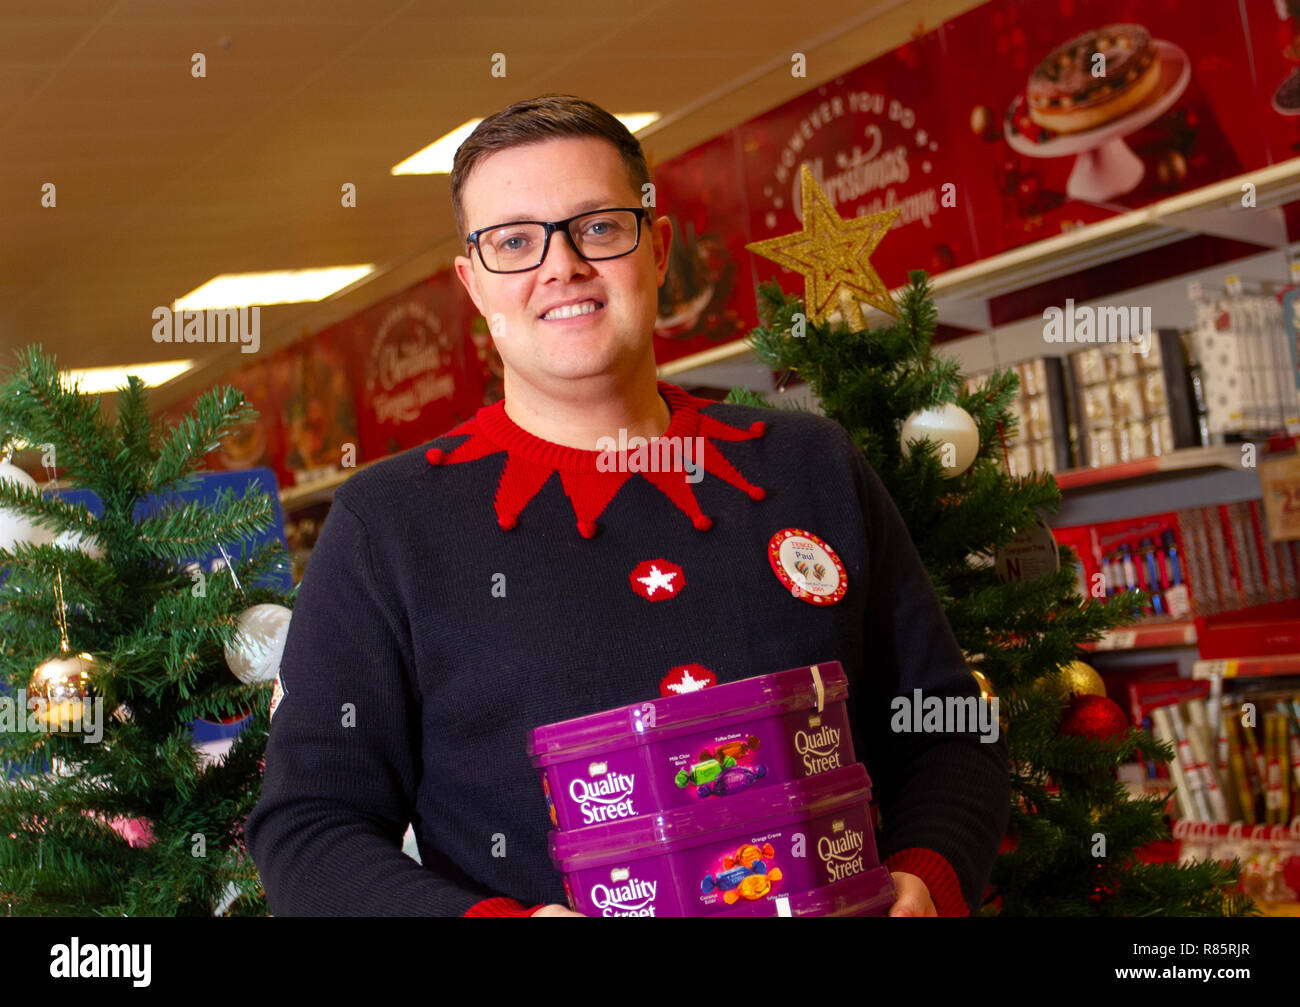 Southport, Merseyside, UK. 13th Dec, 2018. Paul (Manager) displays Christmas spirit at Tesco as employees join in the festive fun. Tesco employees entered into the Christmas festive spirit by supporting Save the Children's Christmas jumper day. Staff agreed to simply stick on a silly sweater and encourage donations to help save children's lives. Friday marks the seventh annual Christmas Jumper Day raising funds for charity on the woollen sartorial event of the year, Credit: MediaWorldImages/AlamyLiveNews. Stock Photo